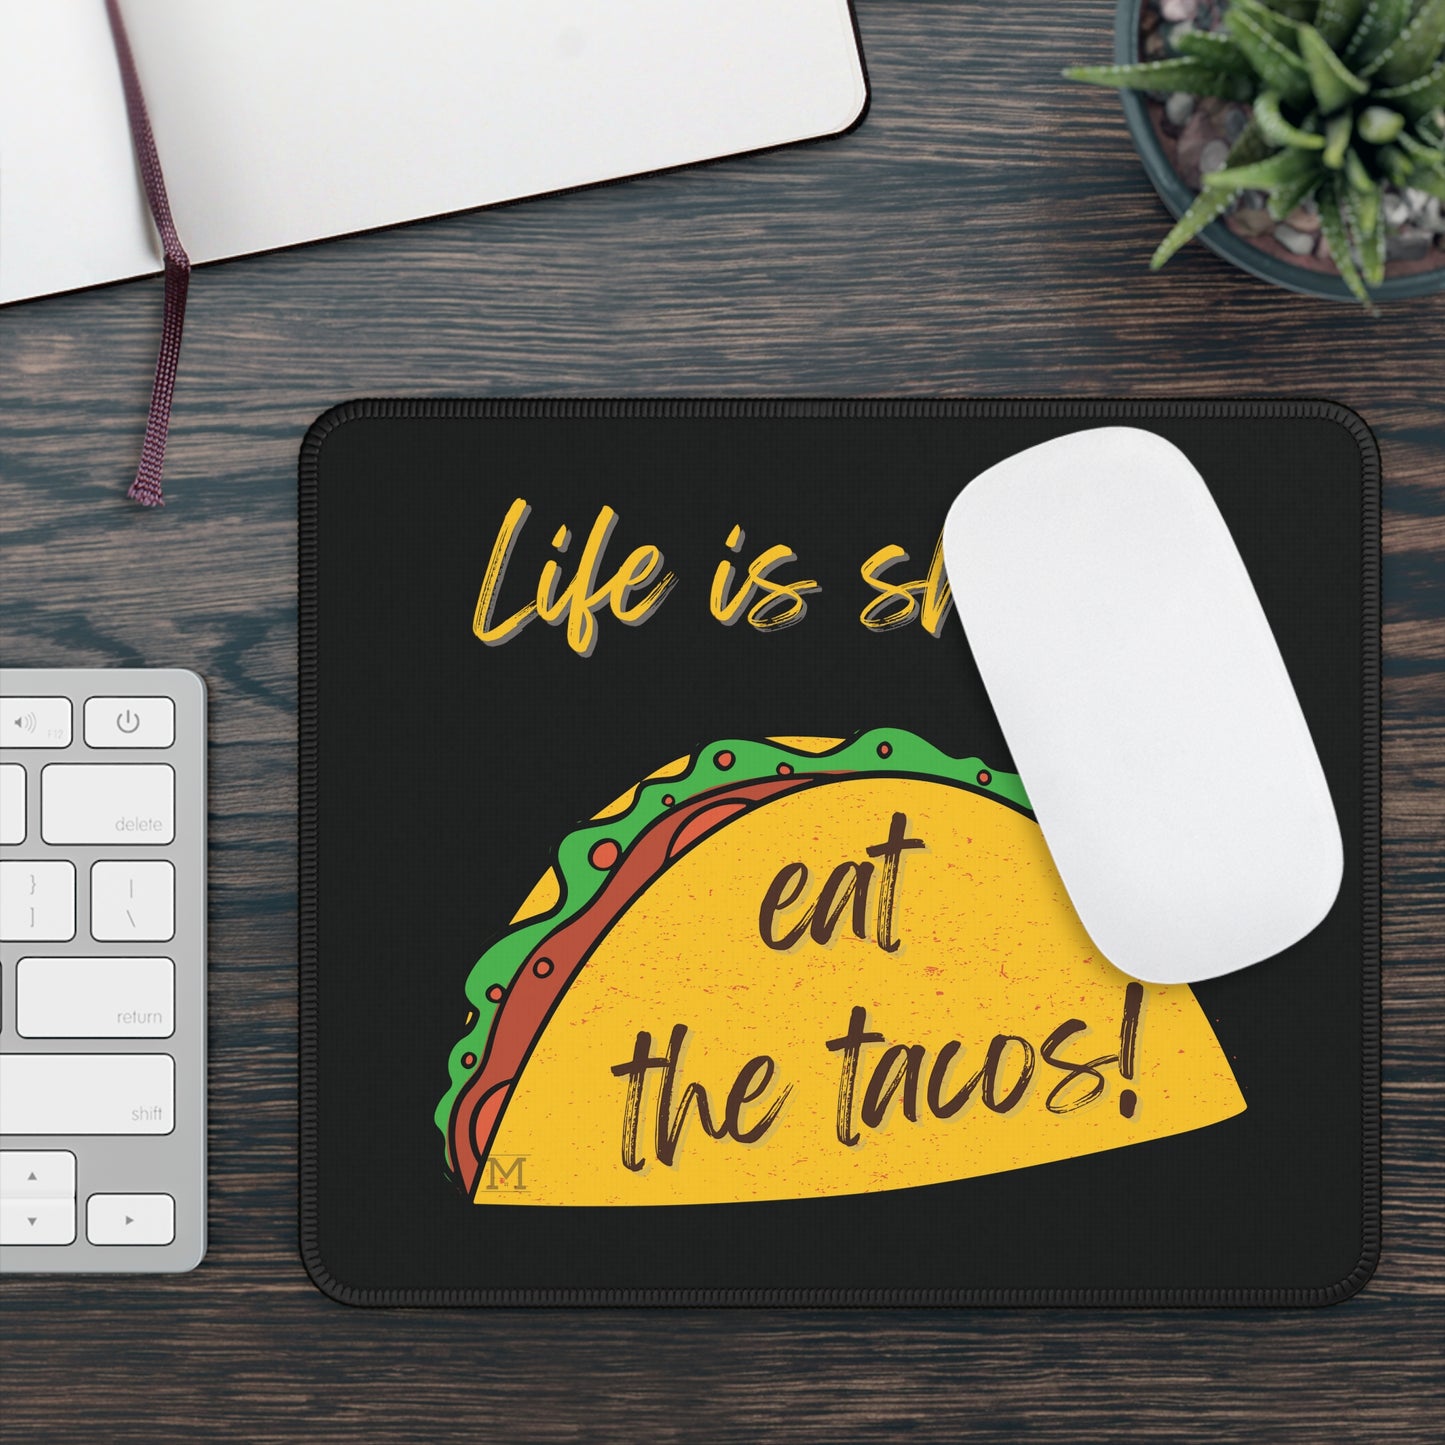 Life Is Short... Eat The Tacos! Gaming Mouse Pad 9"x7" and 0.12" thick by MII Designs